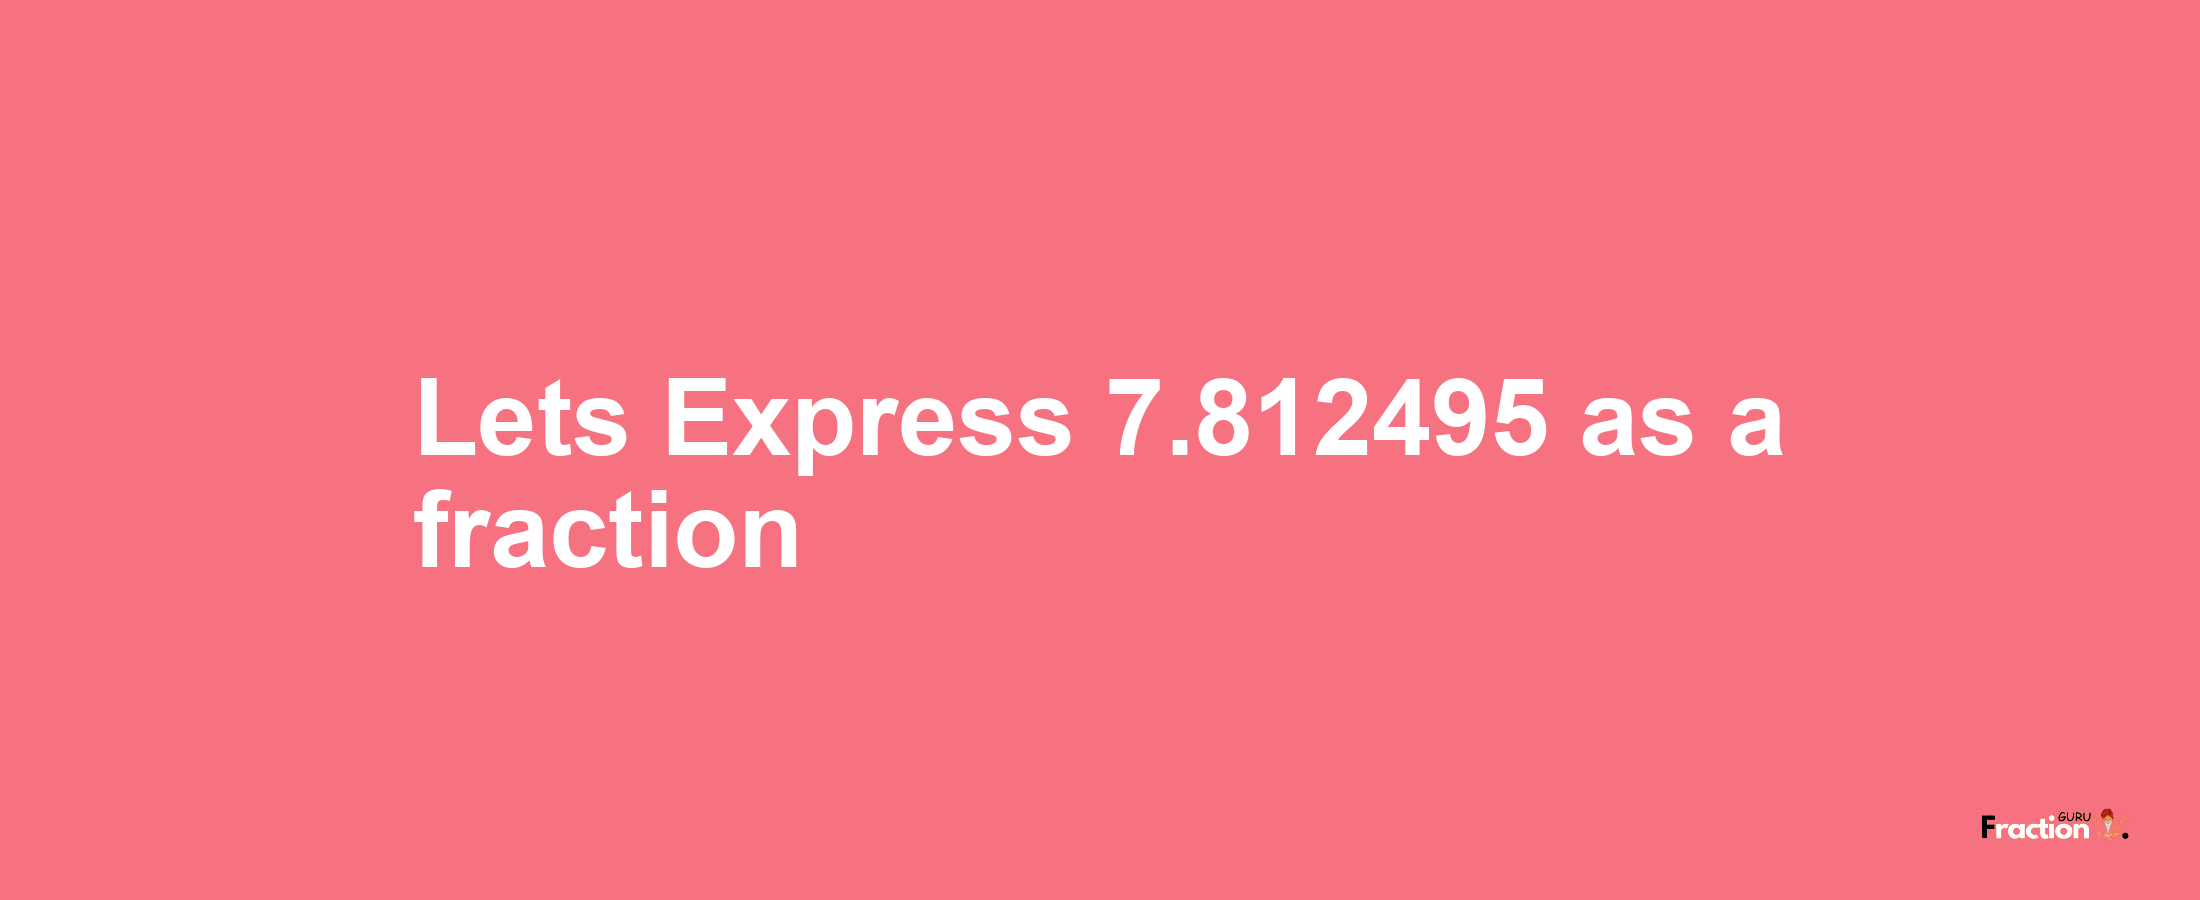 Lets Express 7.812495 as afraction